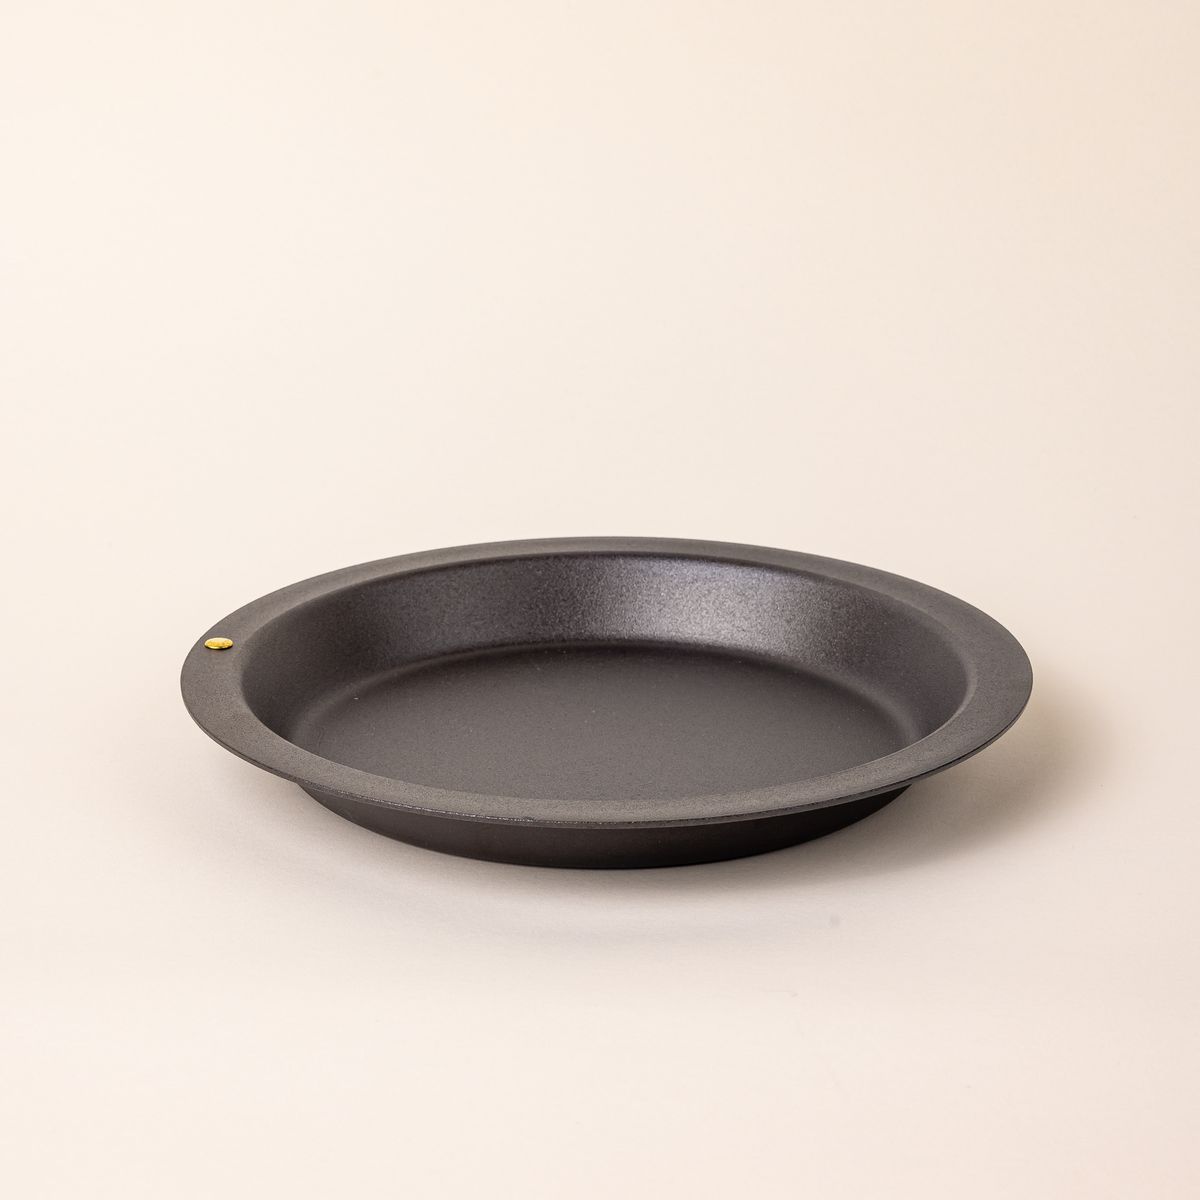 A simple iron pie plate with a wide rim and shallow body